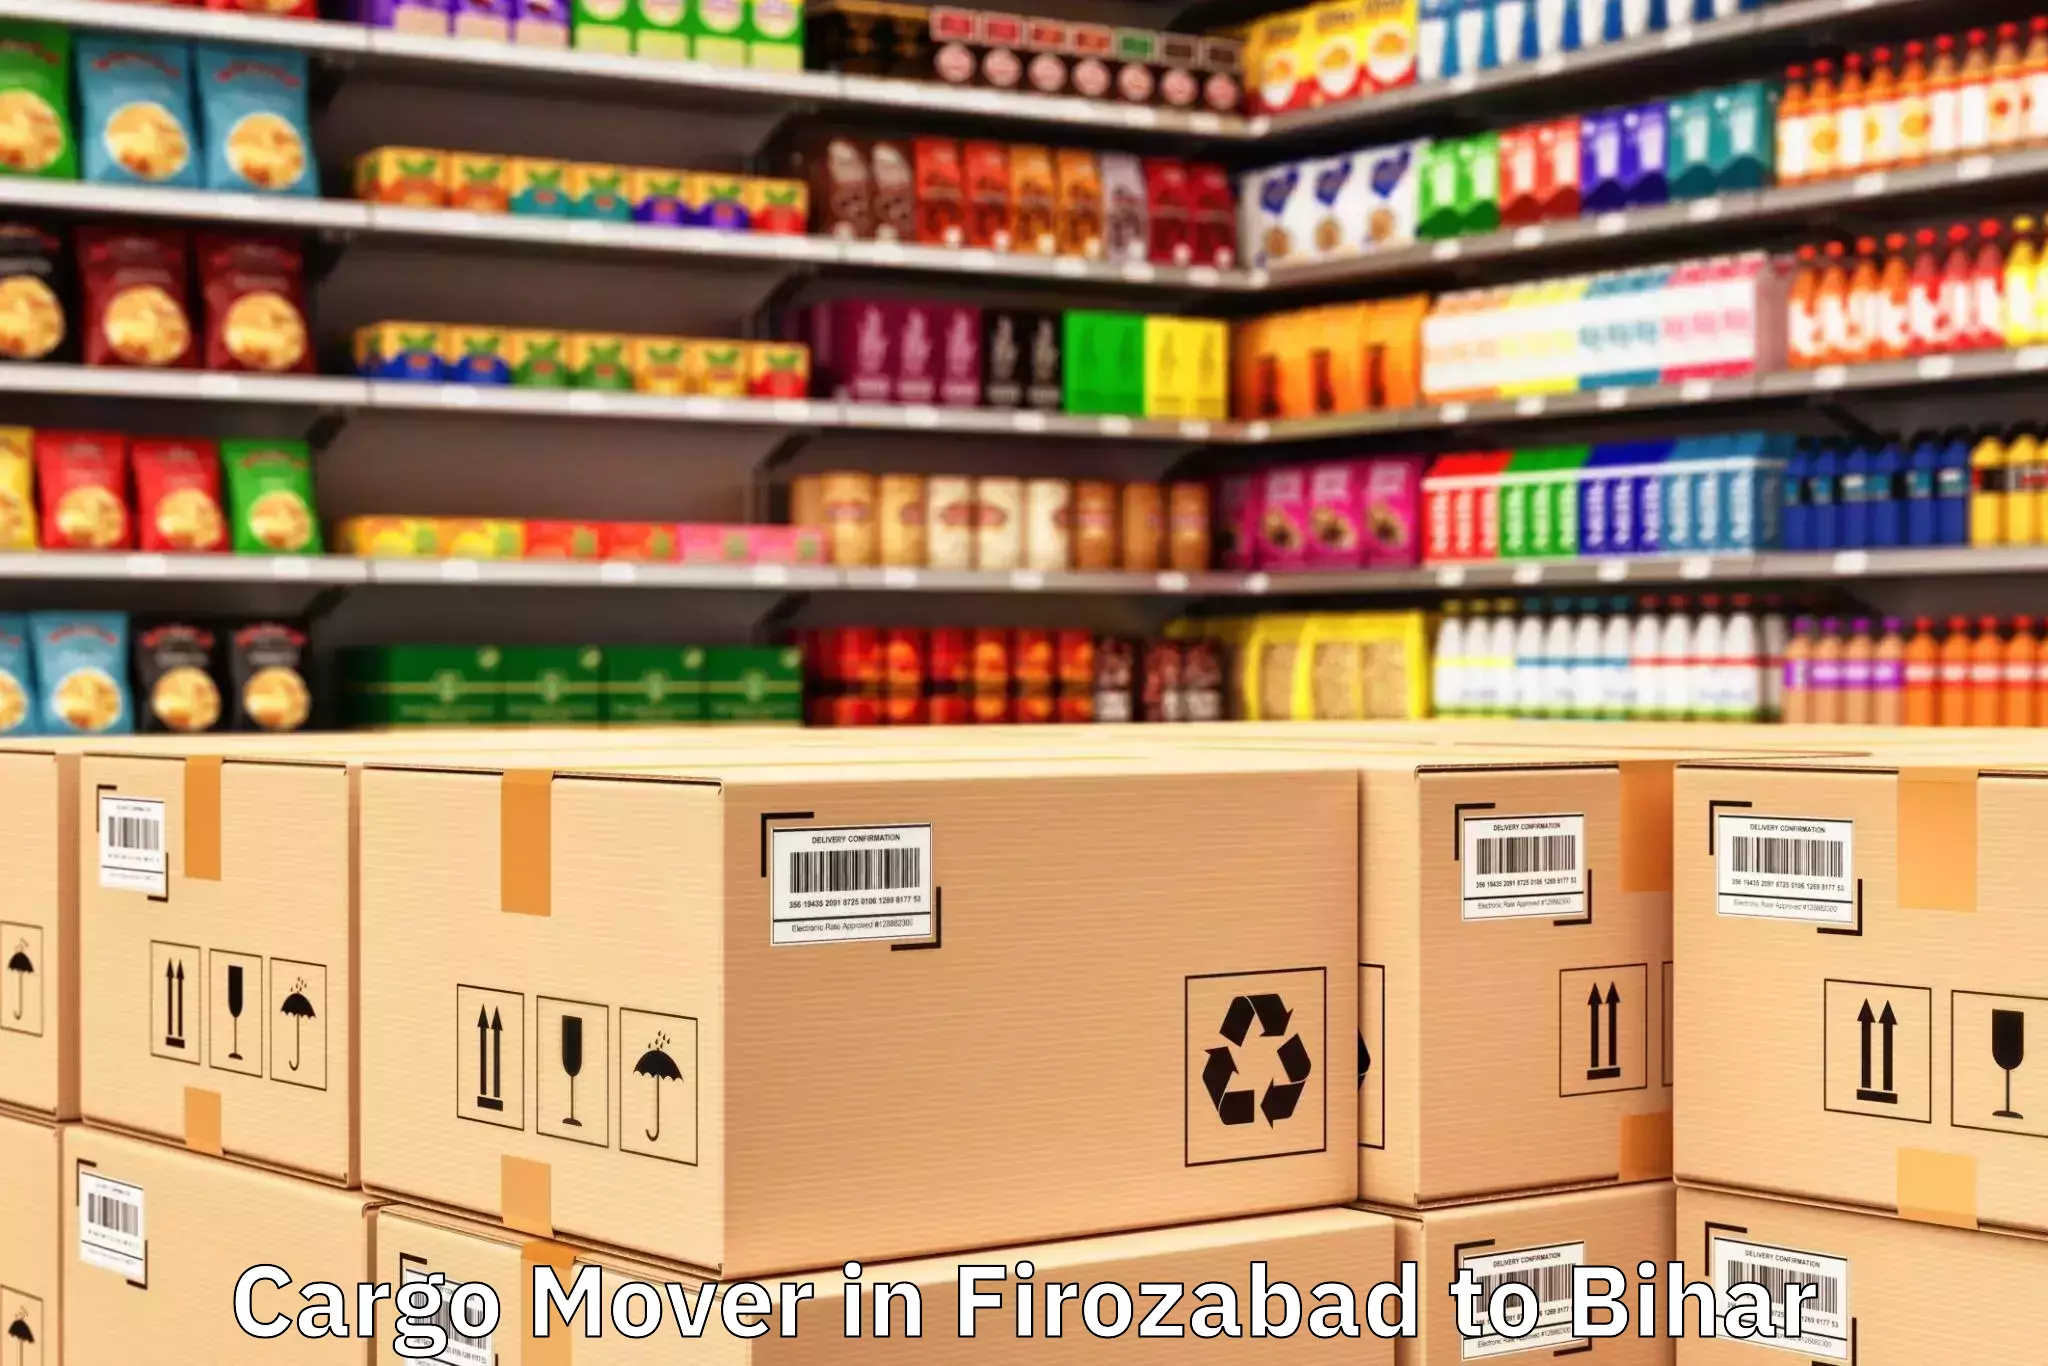 Hassle-Free Firozabad to Ghailar Cargo Mover